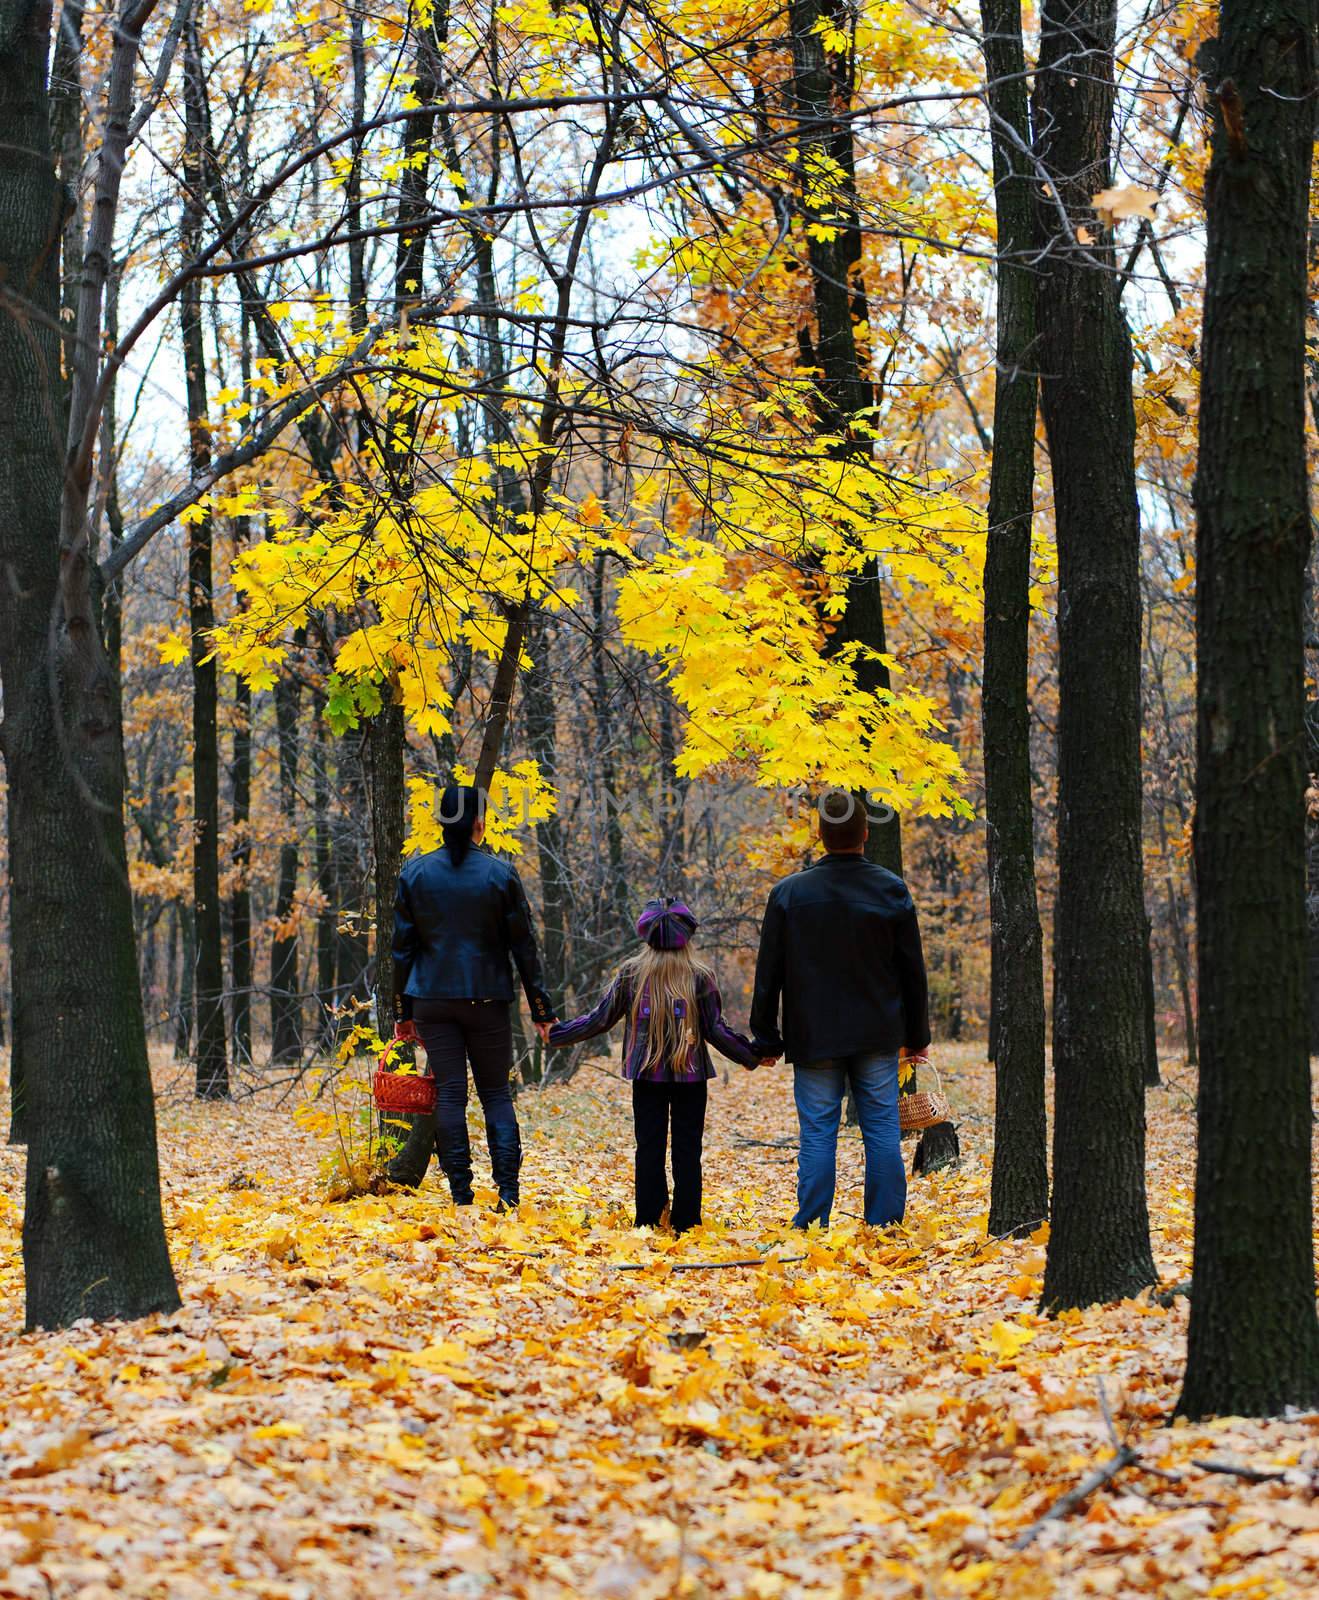 Family in autumn forest. Walk for hands of a happy family from three persons